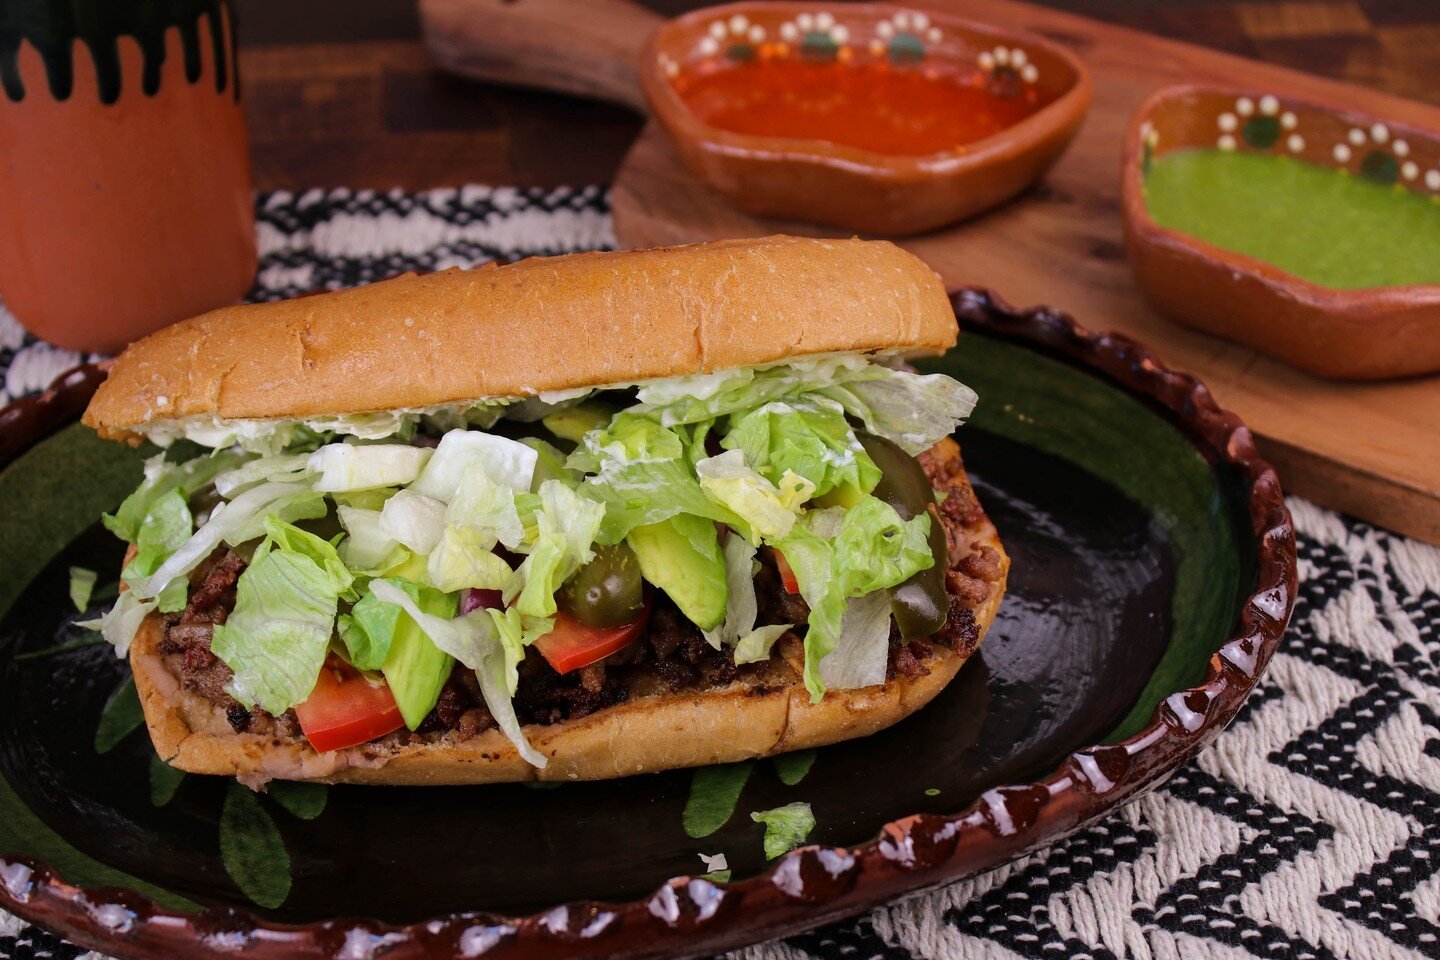 The perfect mid-day lunch! 🥪
.
.
.
#torta #antojitospuebla #mexicanfood #food #foodie